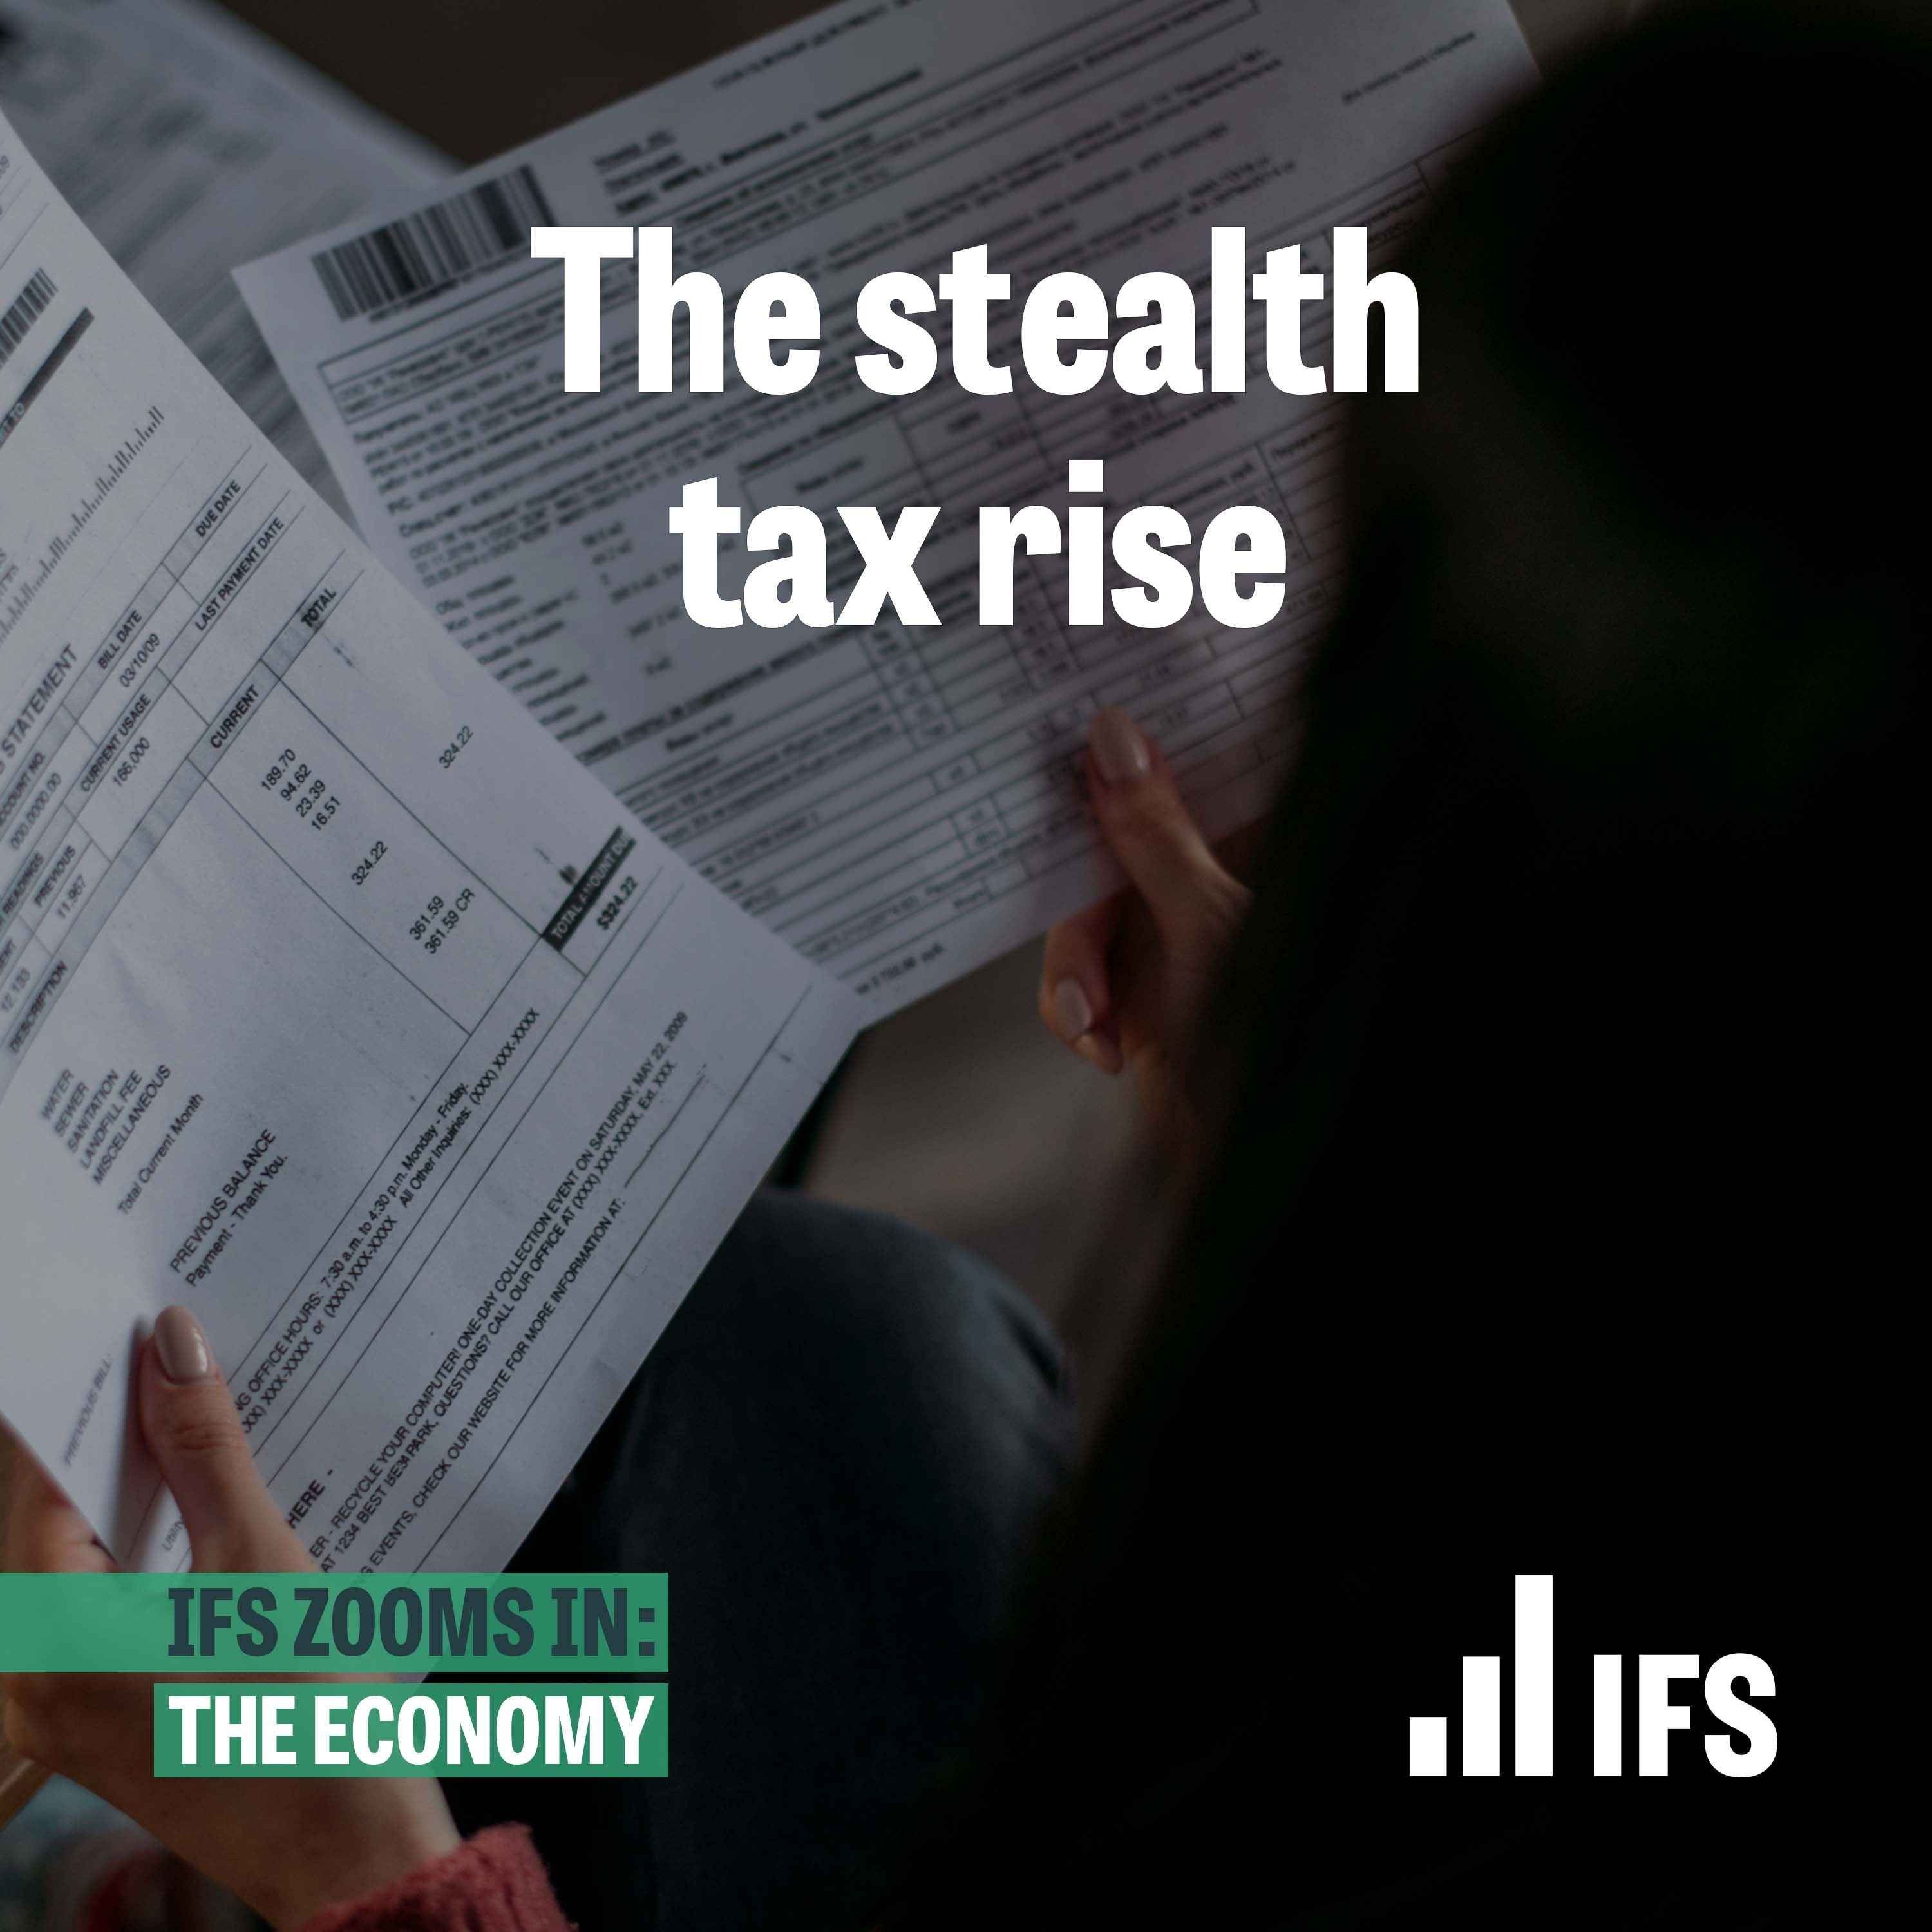 The stealth tax rise